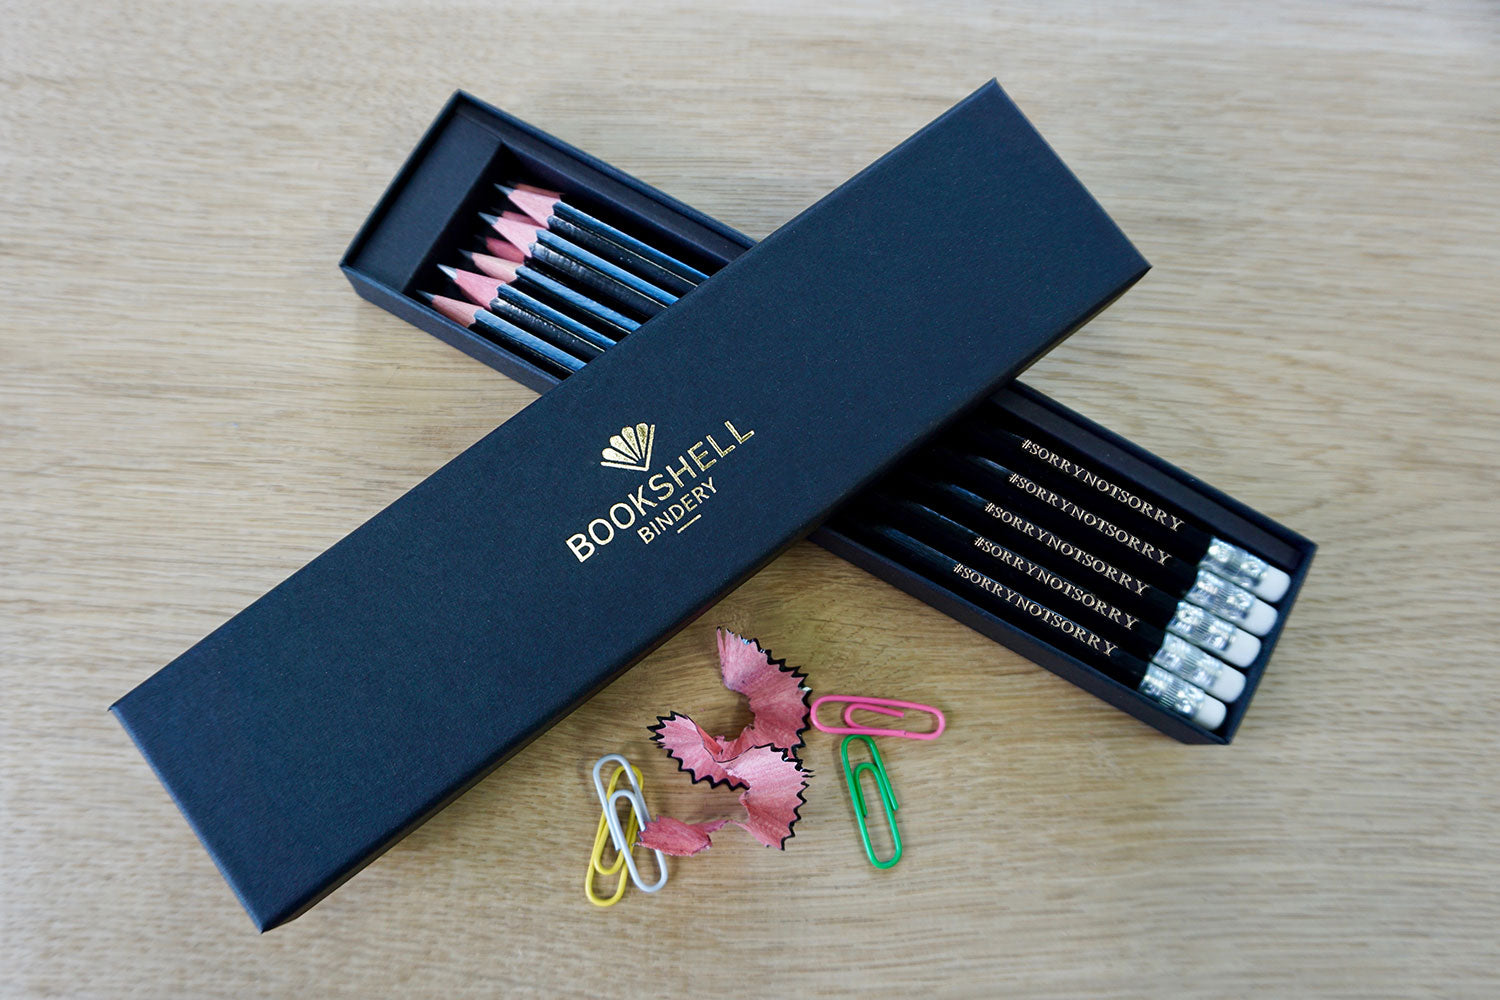 Engraved pencils from Bookshell